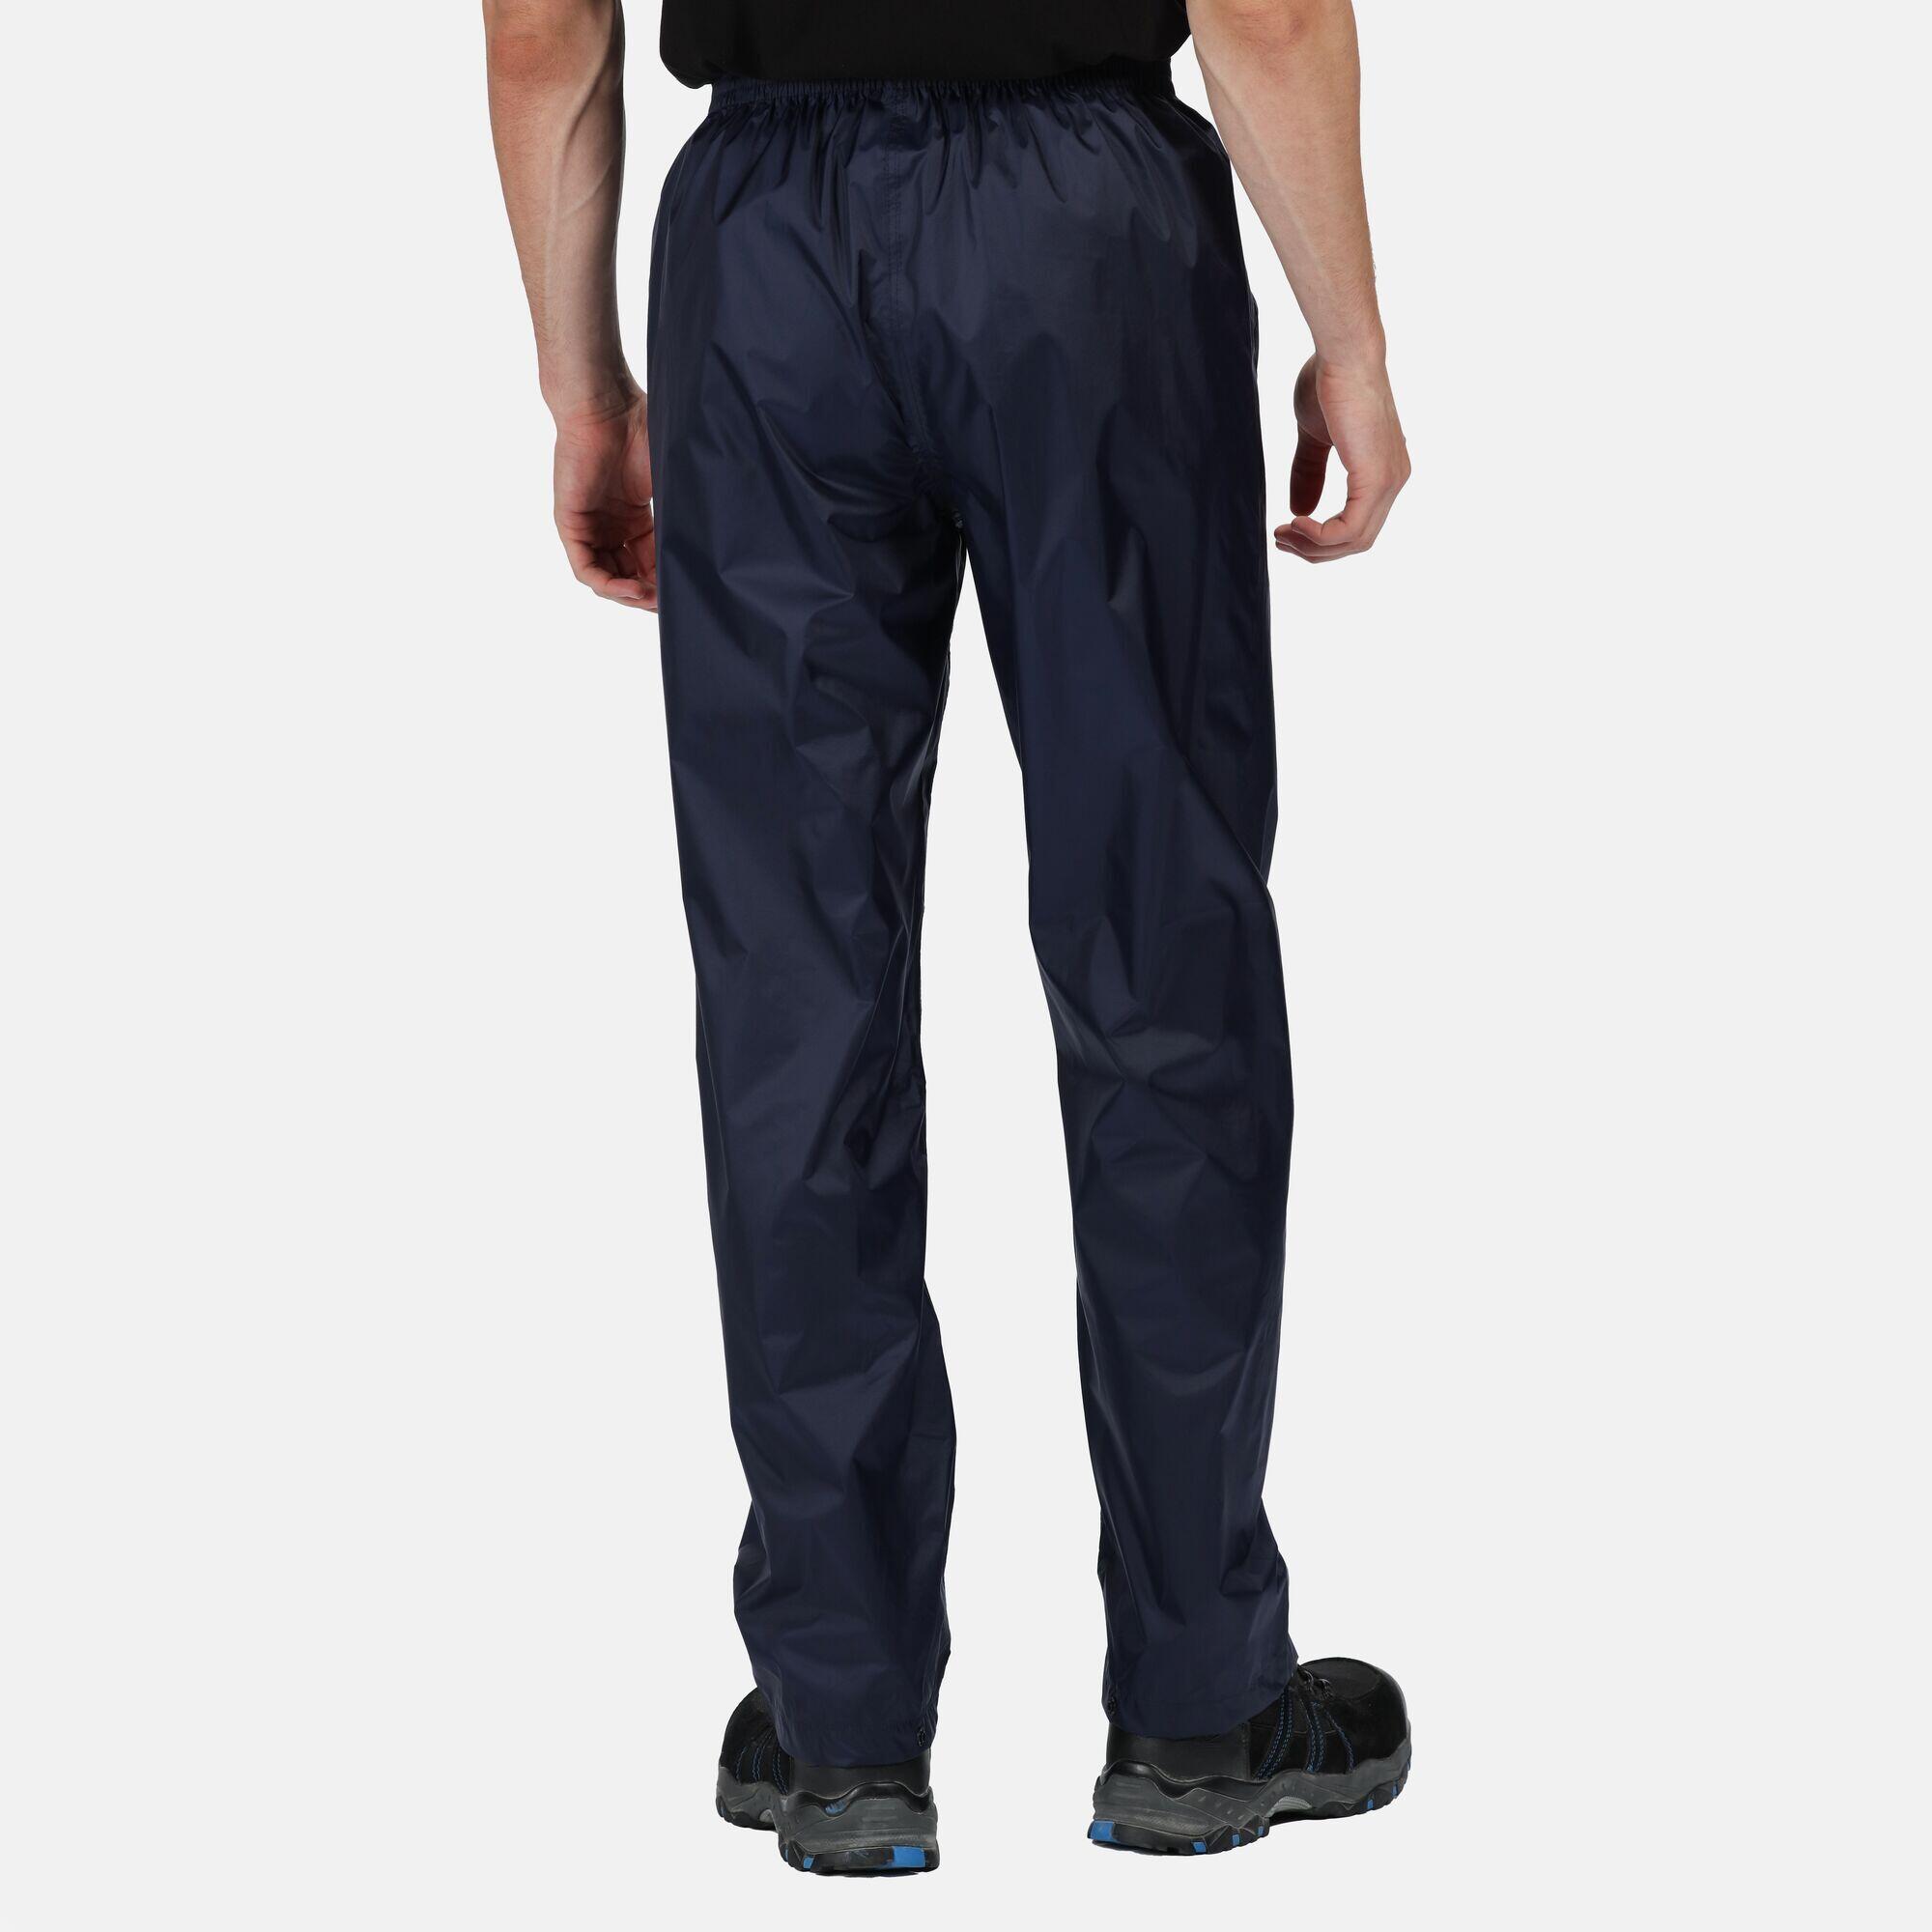 Mens Pro Packaway Overtrousers (Navy) 3/4